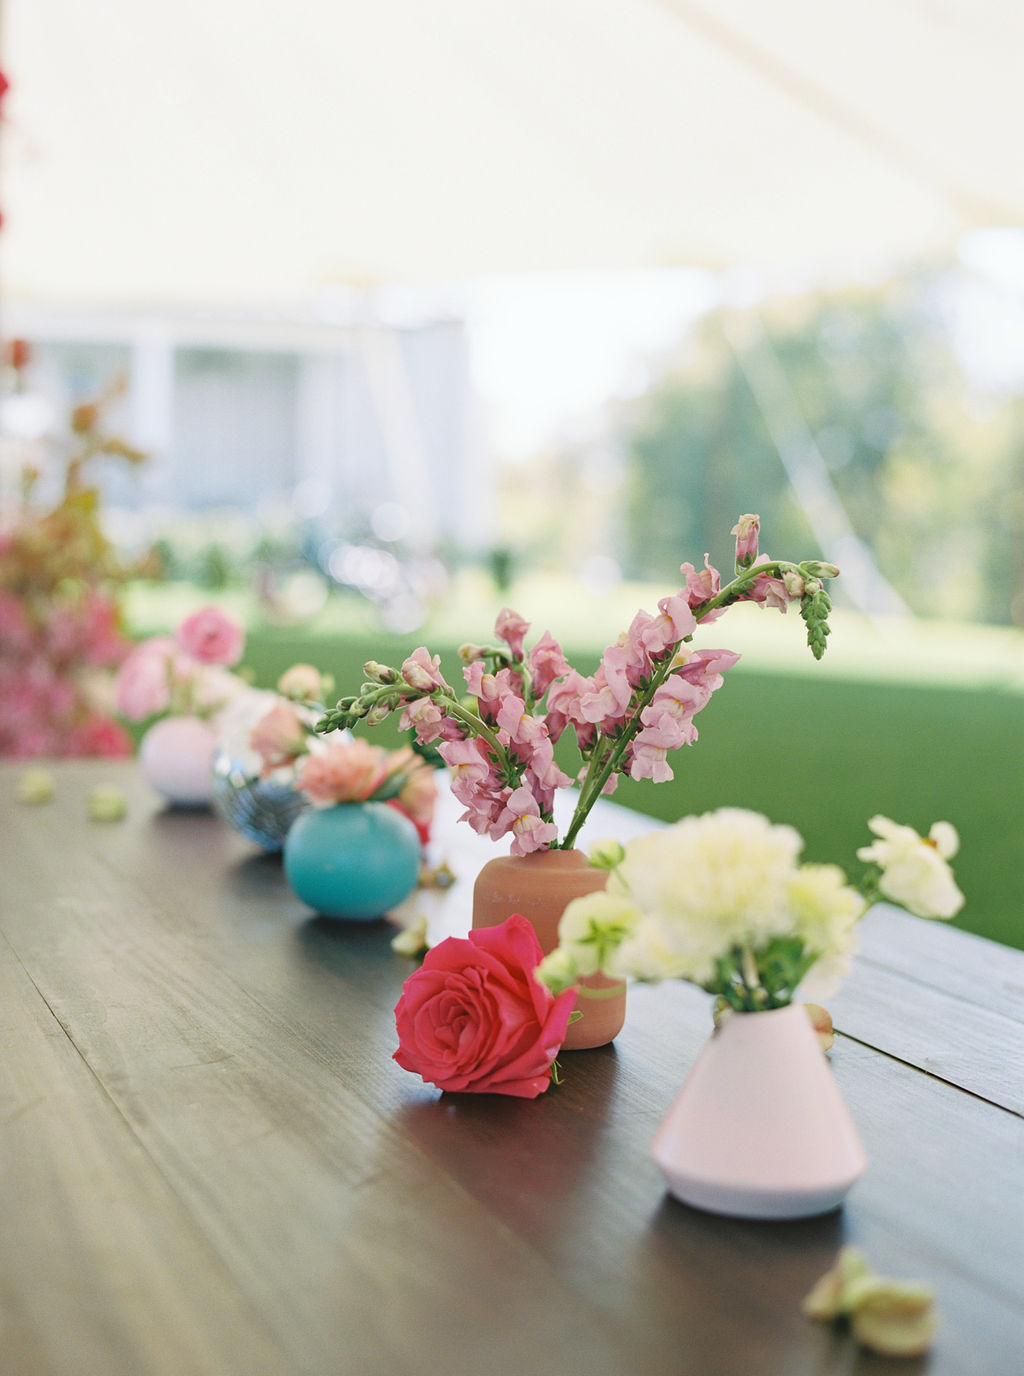 Bright bud vase floral centerpieces for Houston, TX birthday party